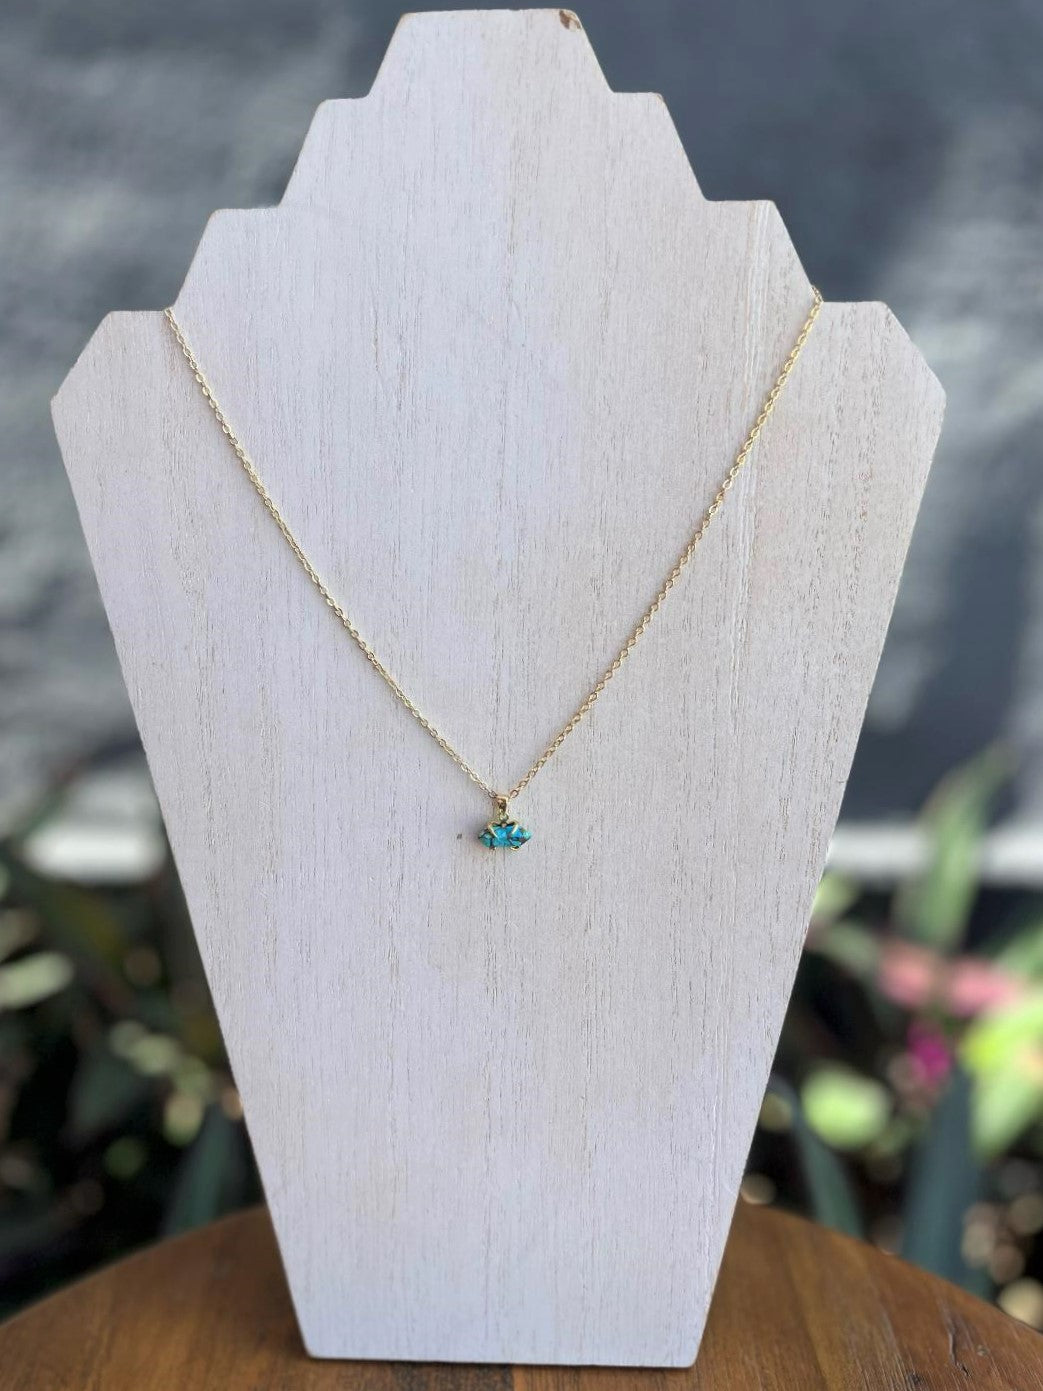 Gold Claw Necklace - Turquoise